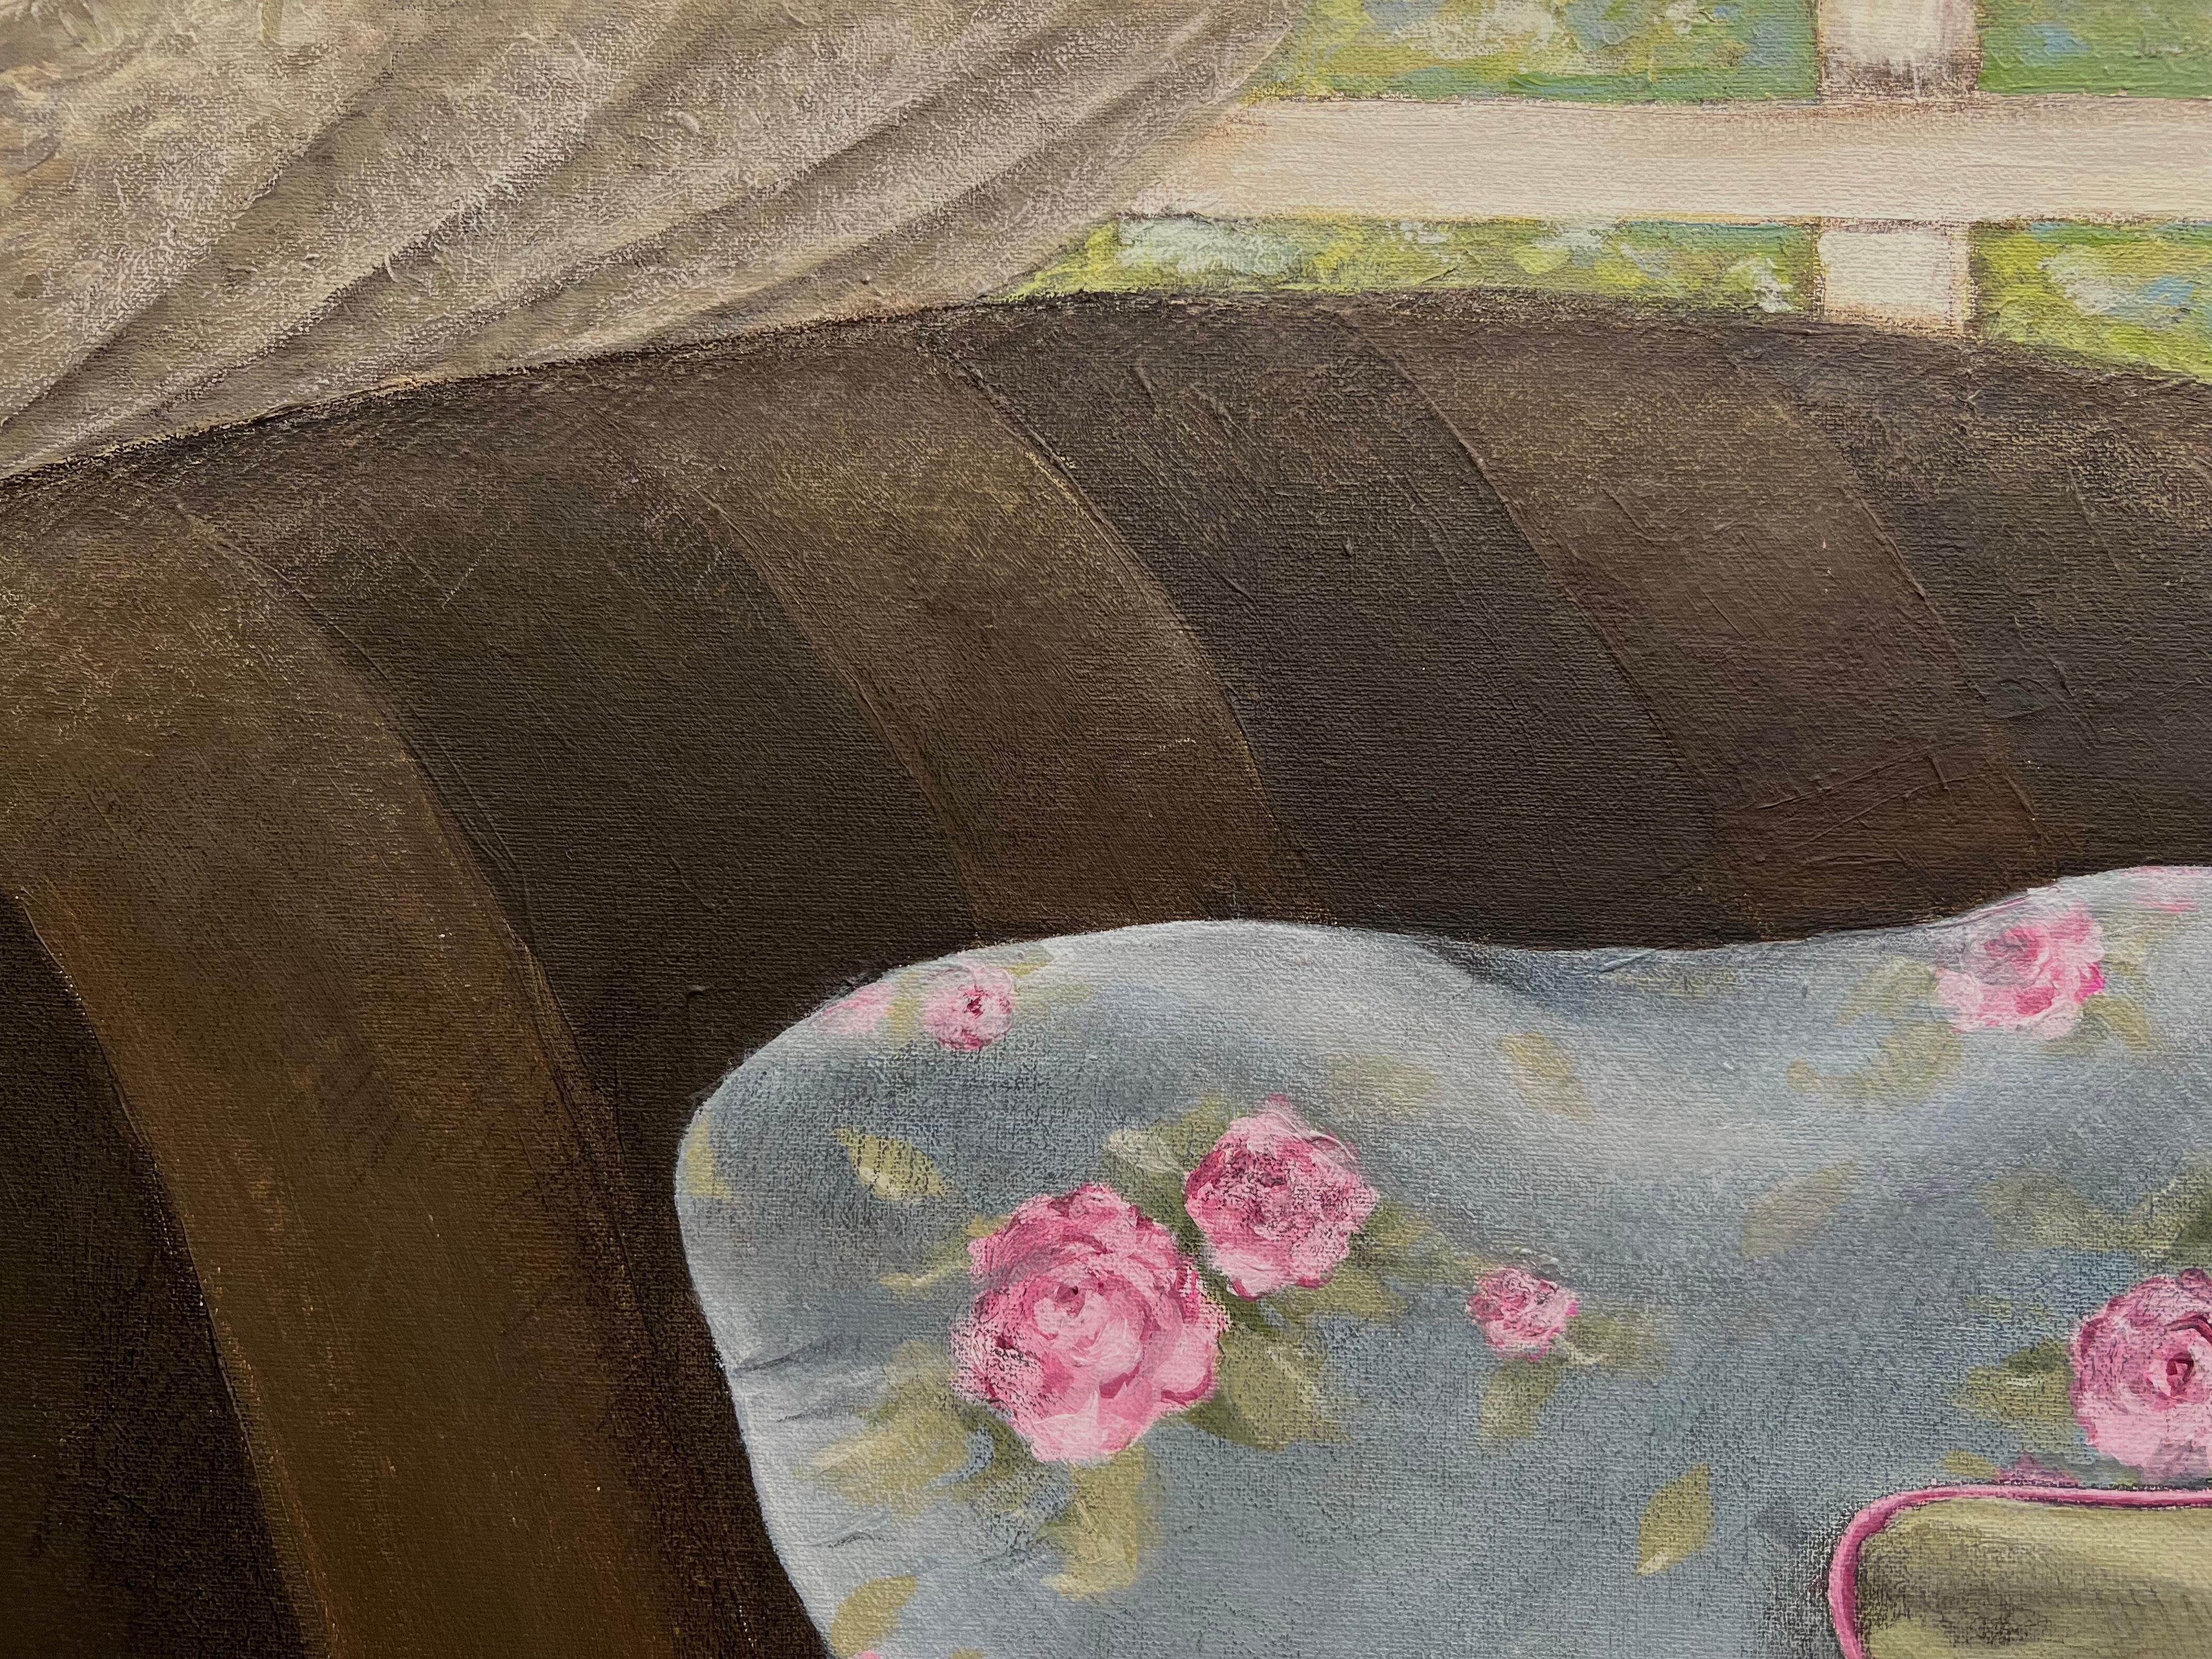 This interior still-life painting on canvas combines expressive brushwork with intricate details capturing a warm and inviting atmosphere. Through the use of acrylic, pencil and color pencil, the lifelike depiction of the blankets tempts one to